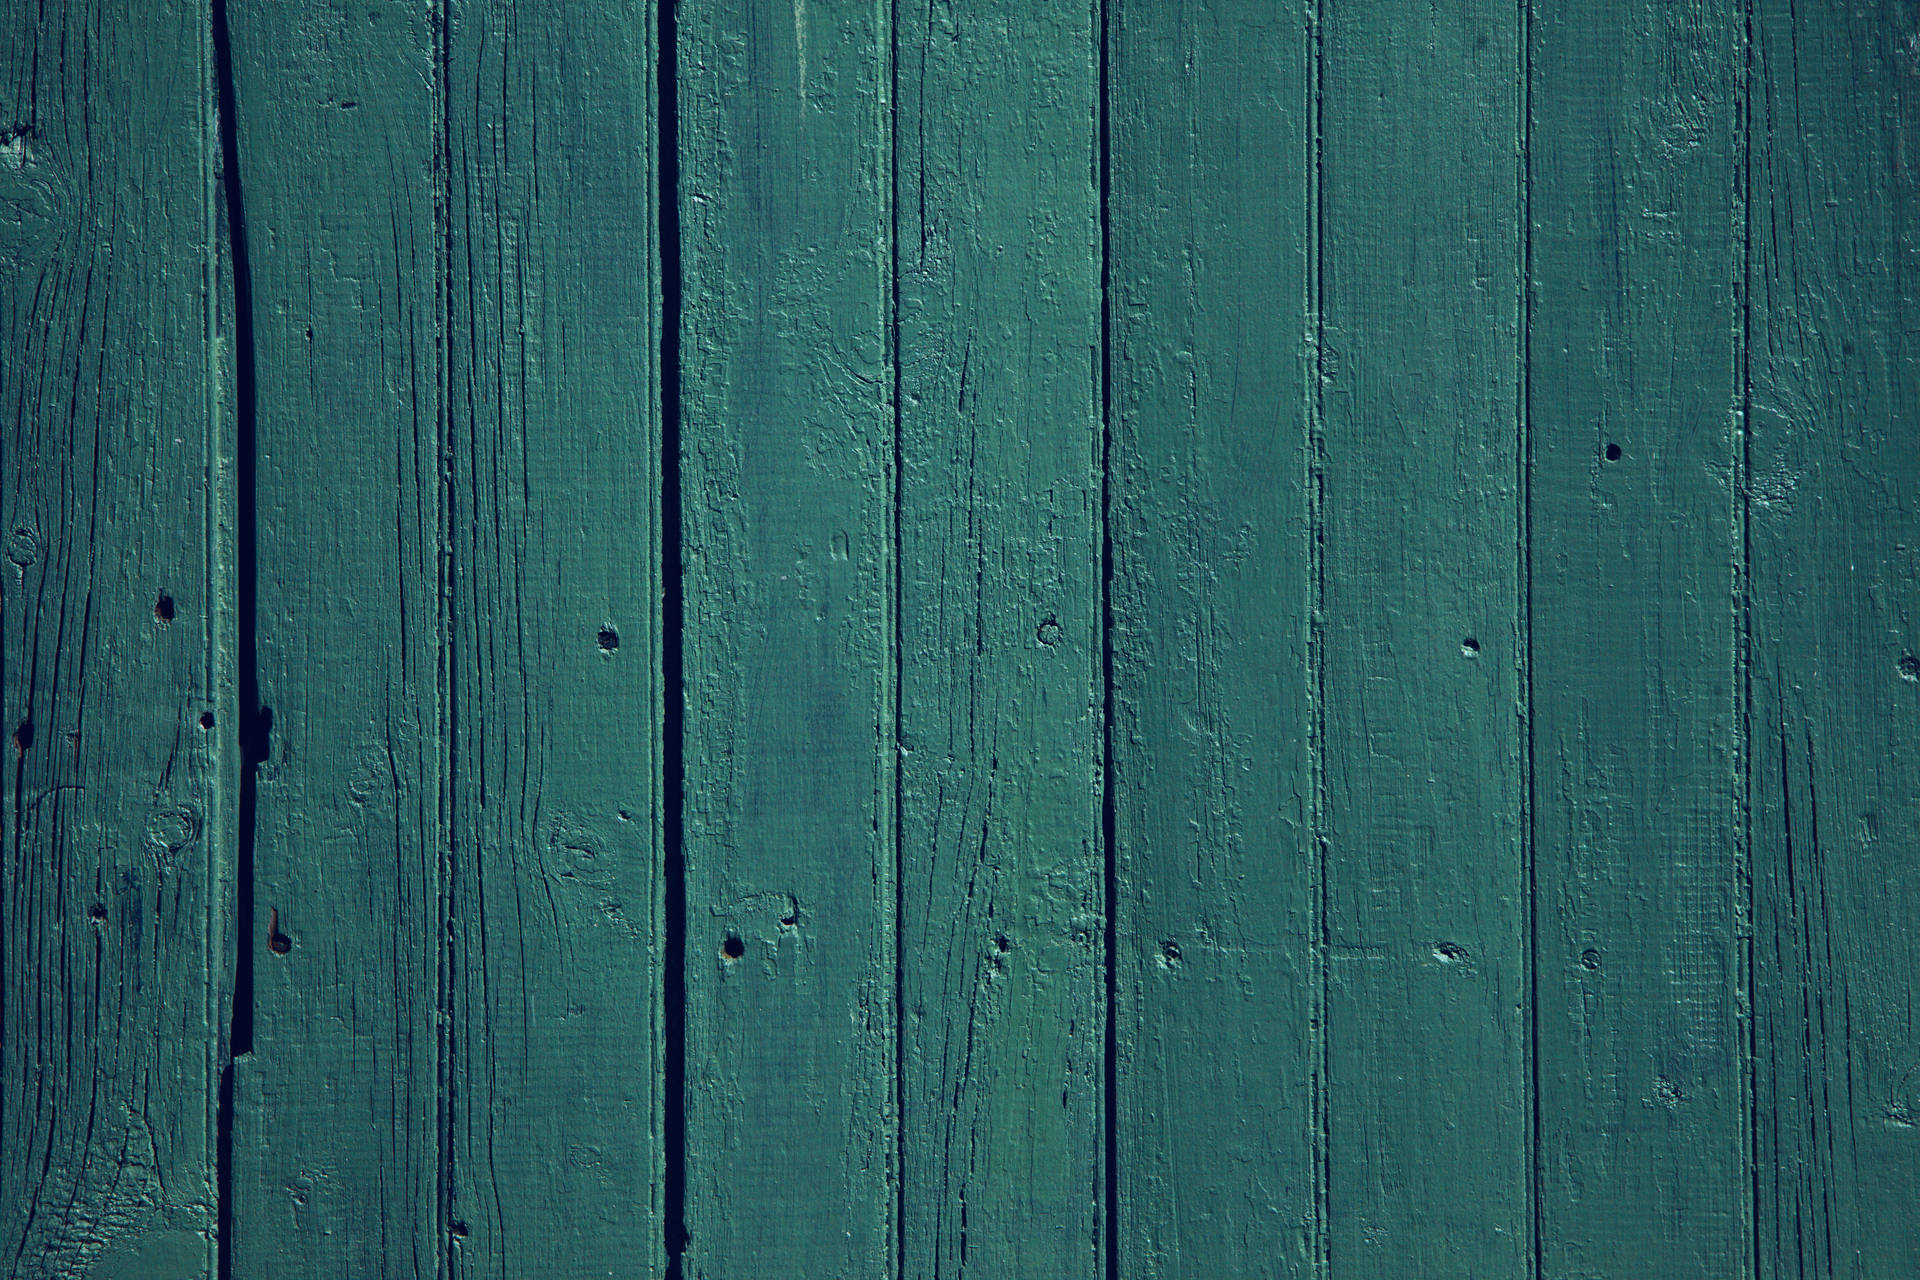 Dark Green 5616X3744 Wallpaper and Background Image